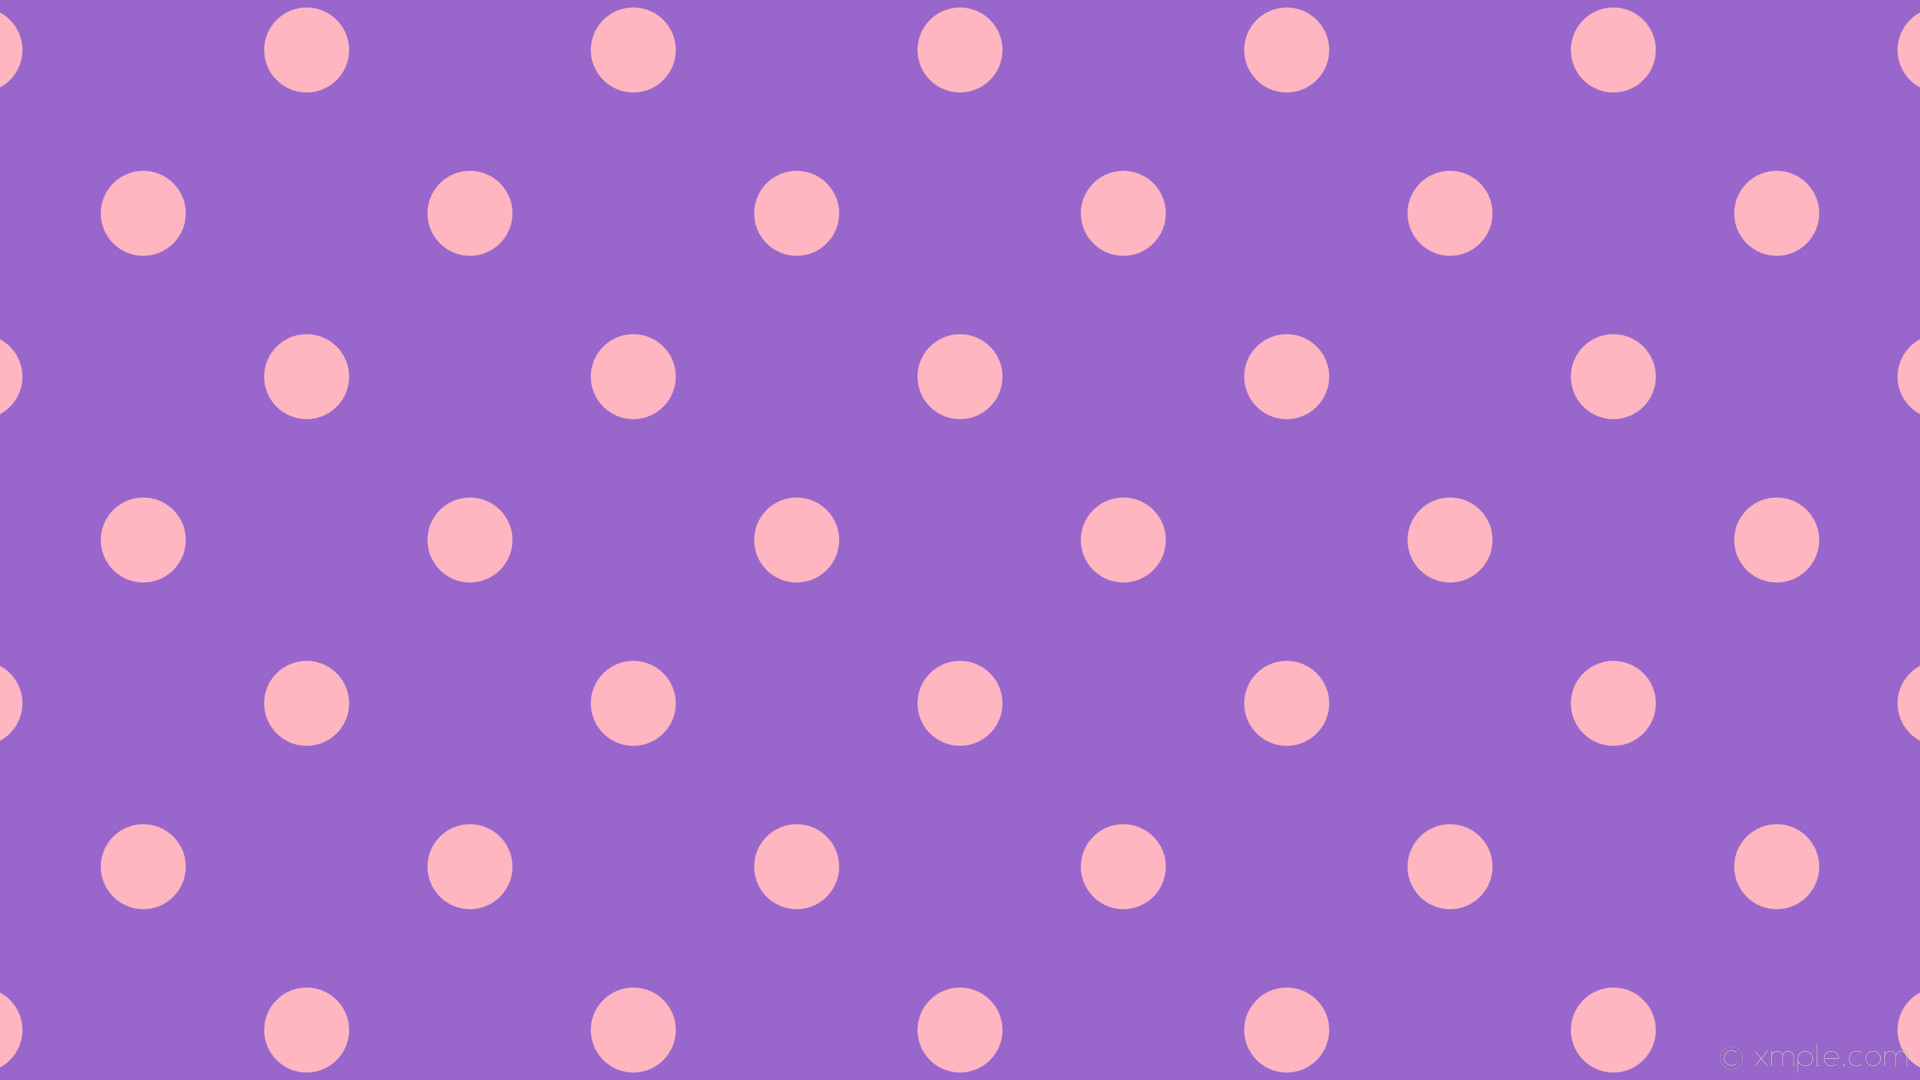 pink and purple backgrounds polka dots